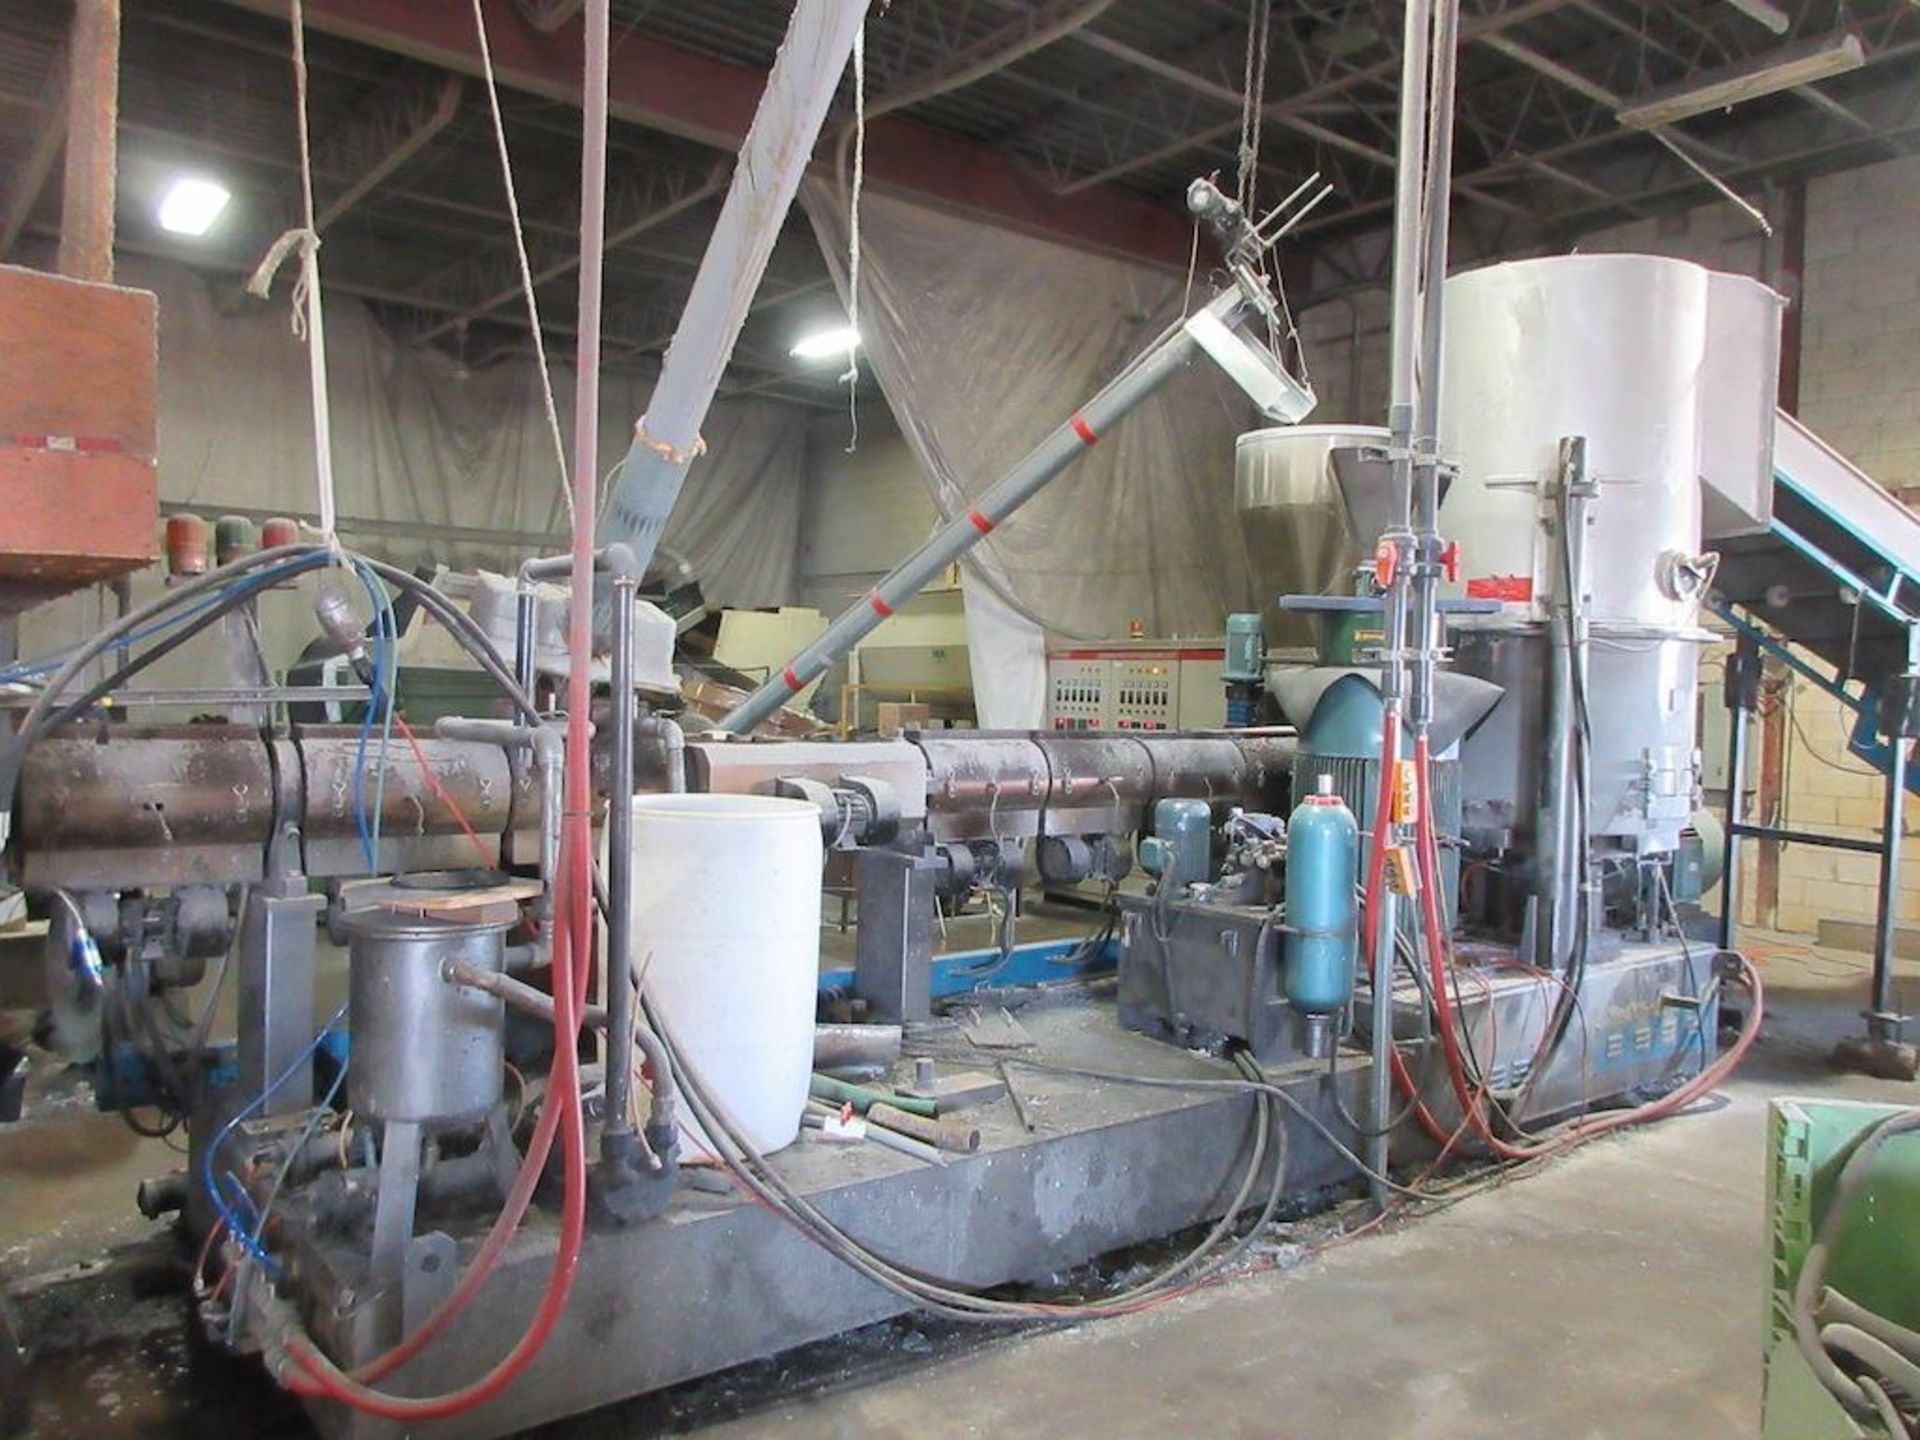 2012 Zhangjiagang Pelletizing Production line, Featuring: Extruder Model ML 130/42, L/D 42:1, screw - Image 20 of 32